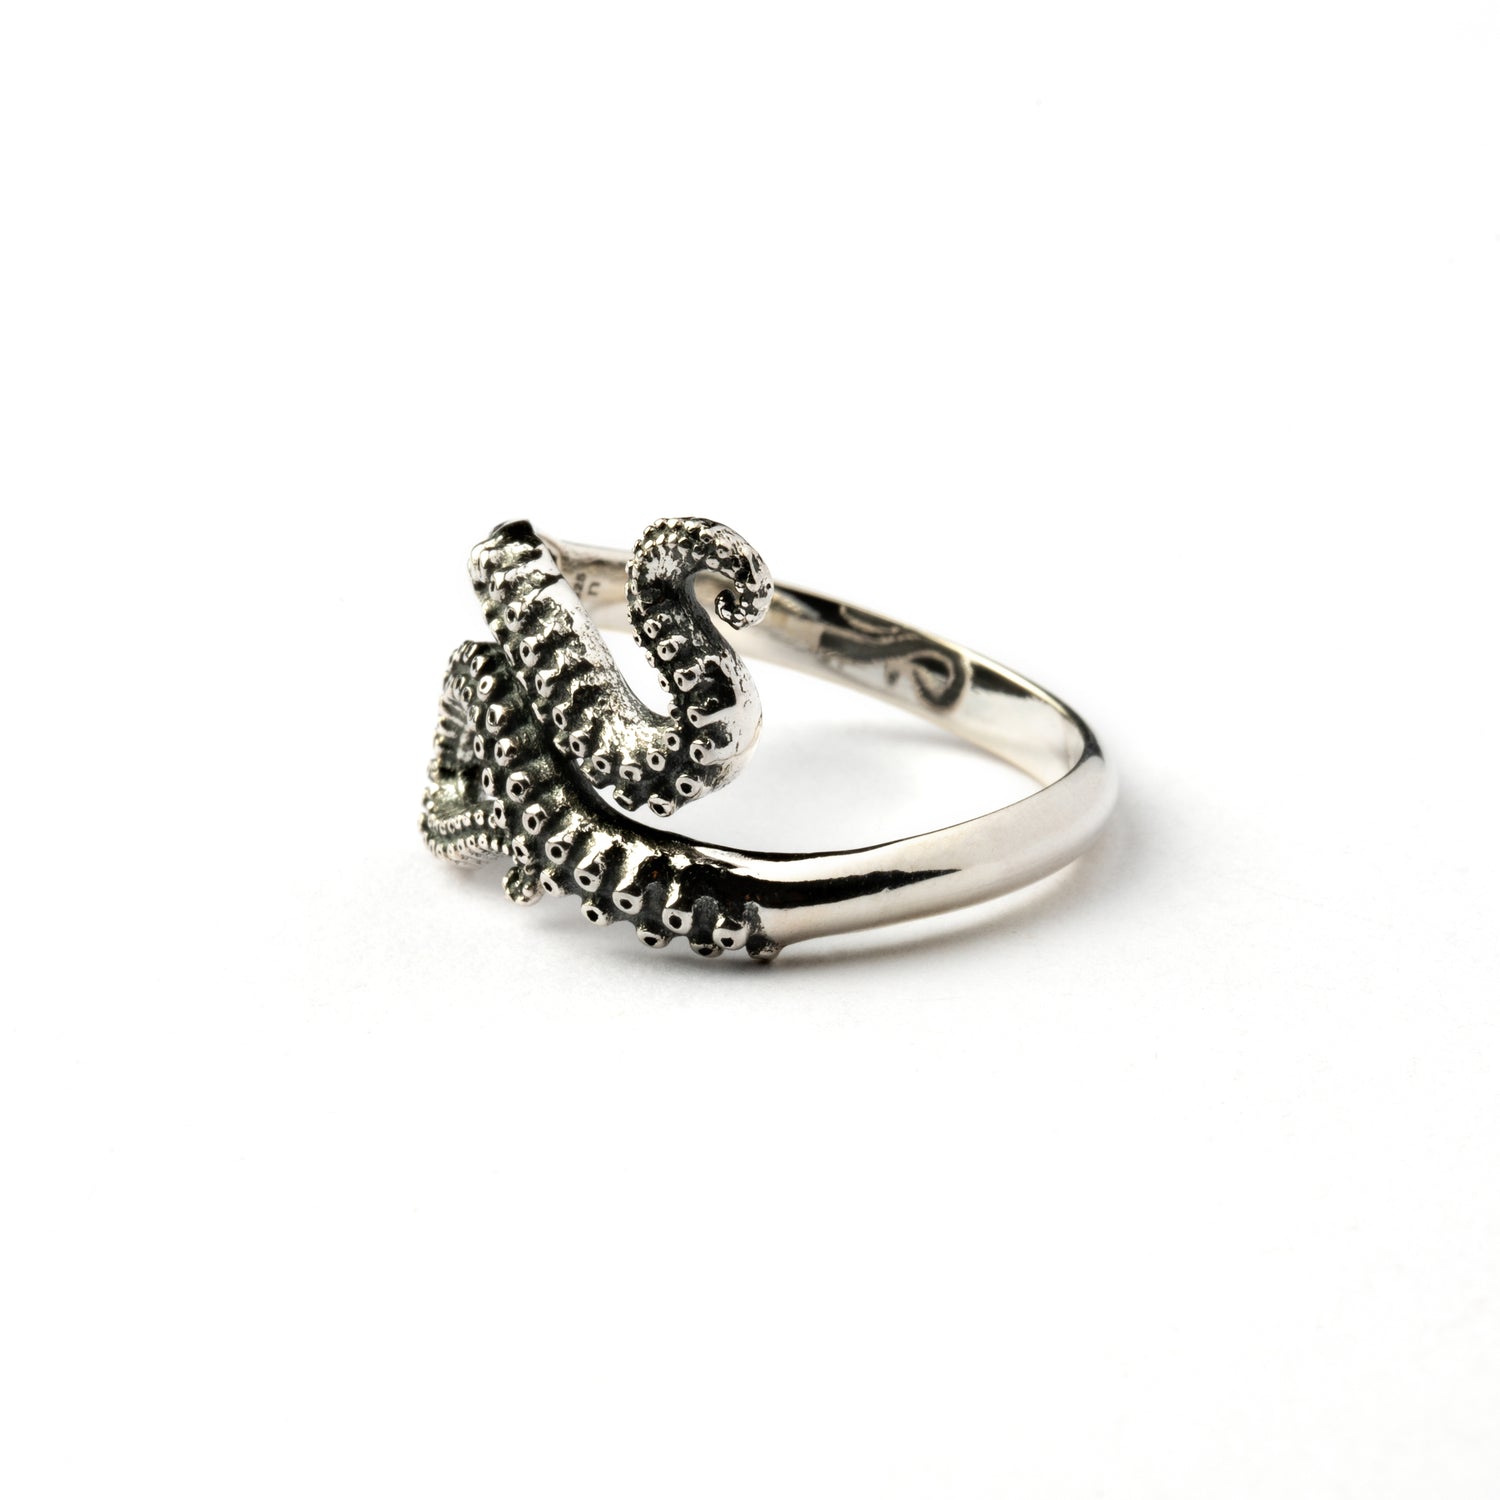 Silver octopus tentacle ring left side view